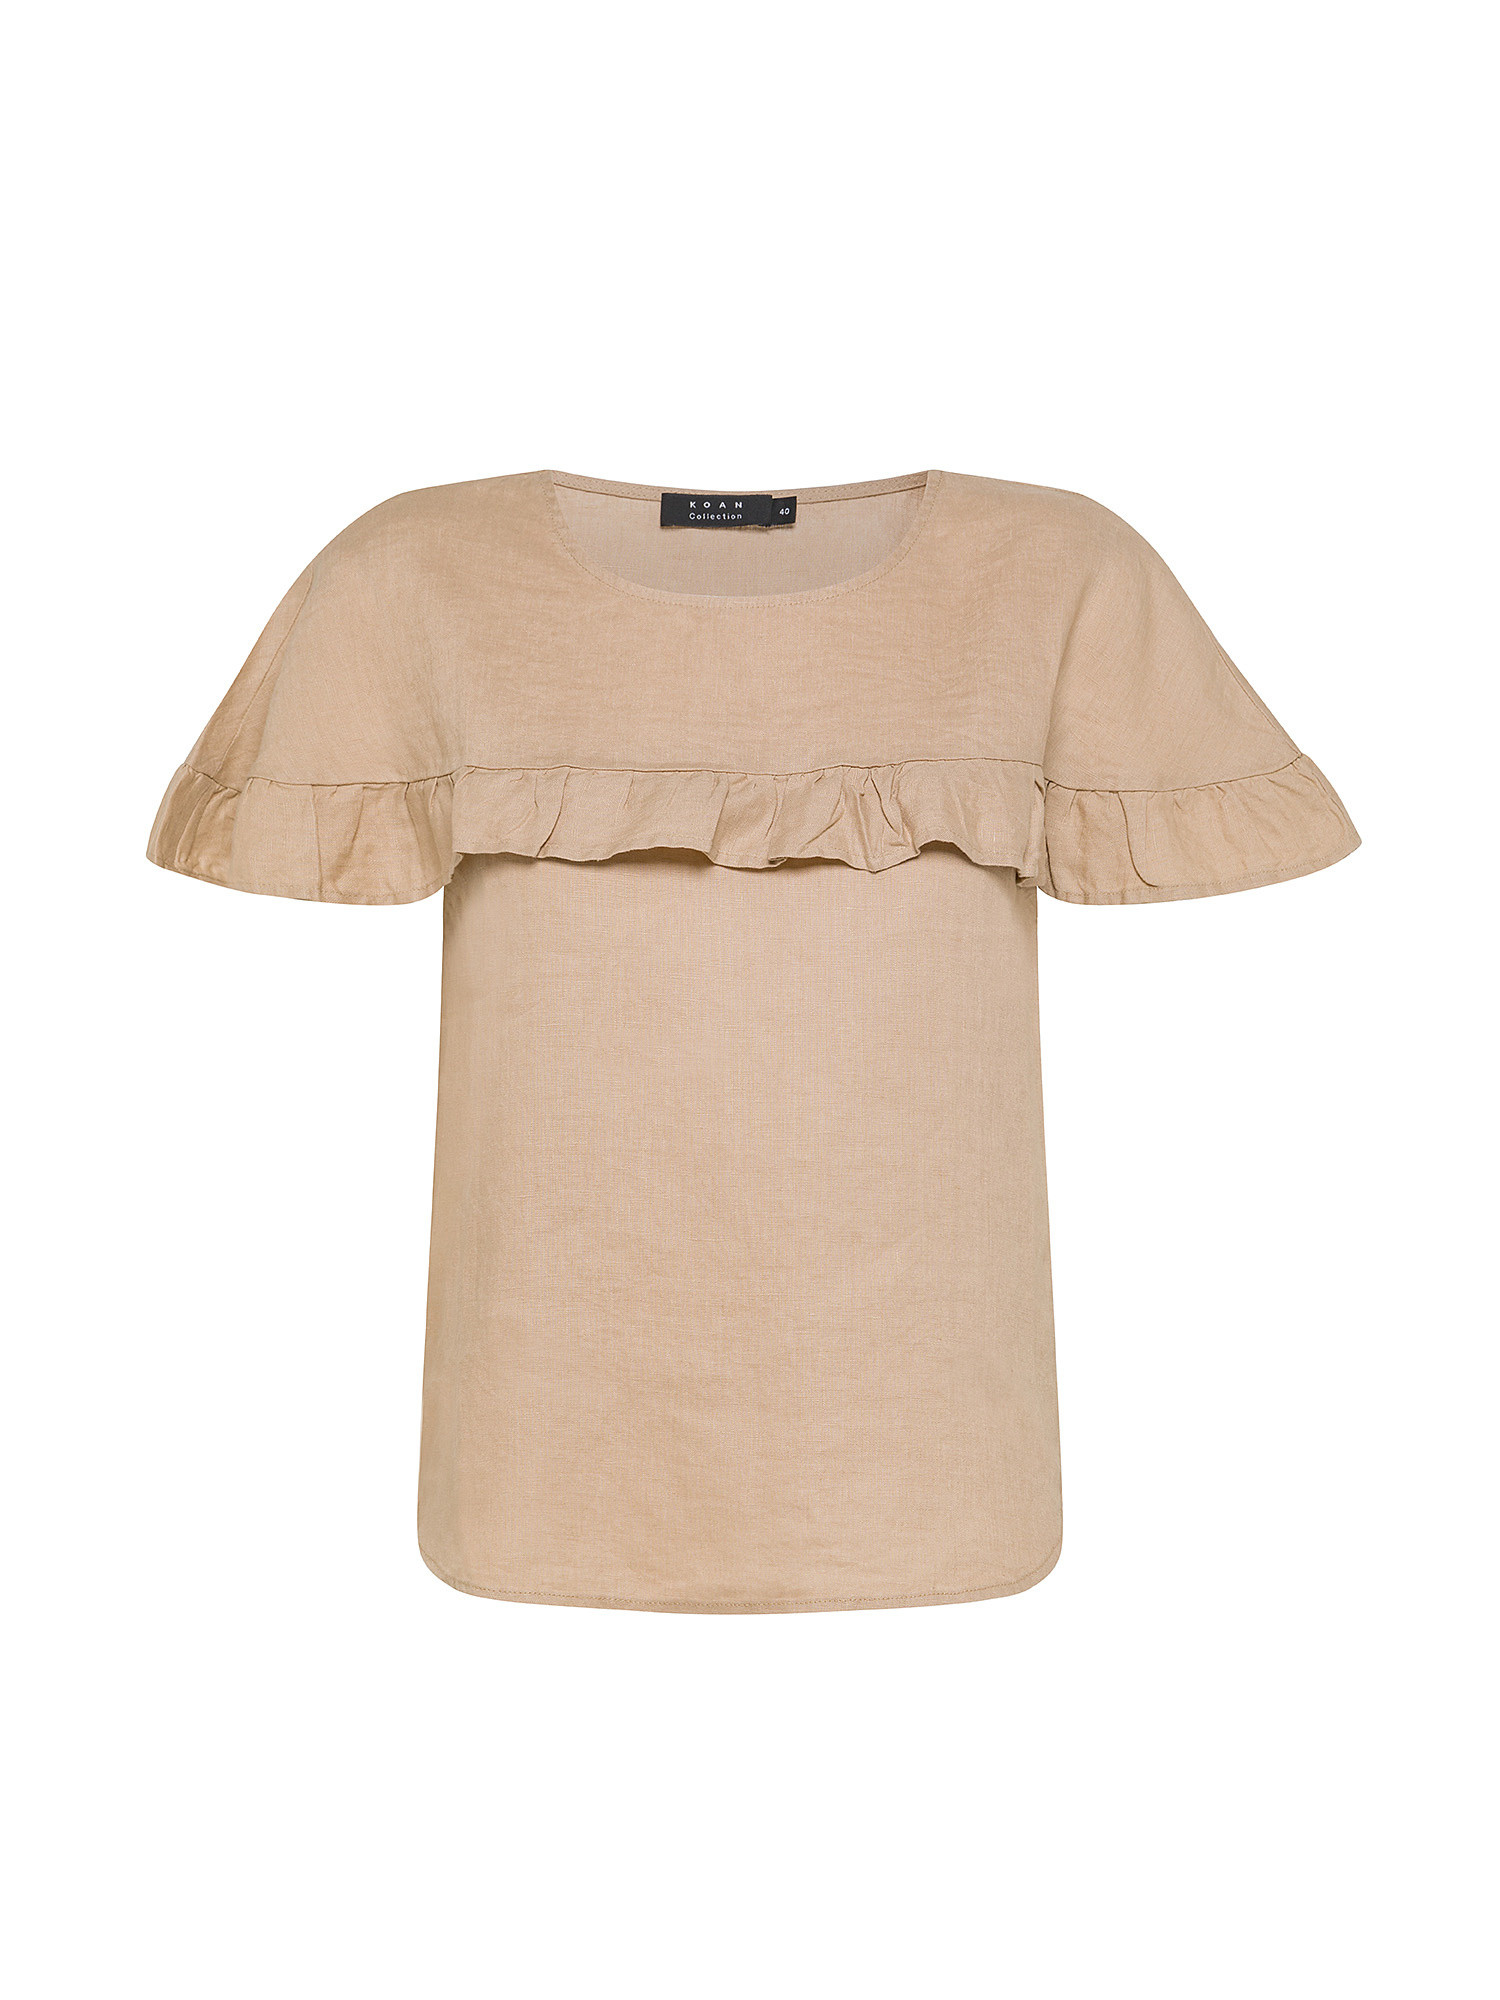 Koan - Blusa in lino con volant, Beige, large image number 0